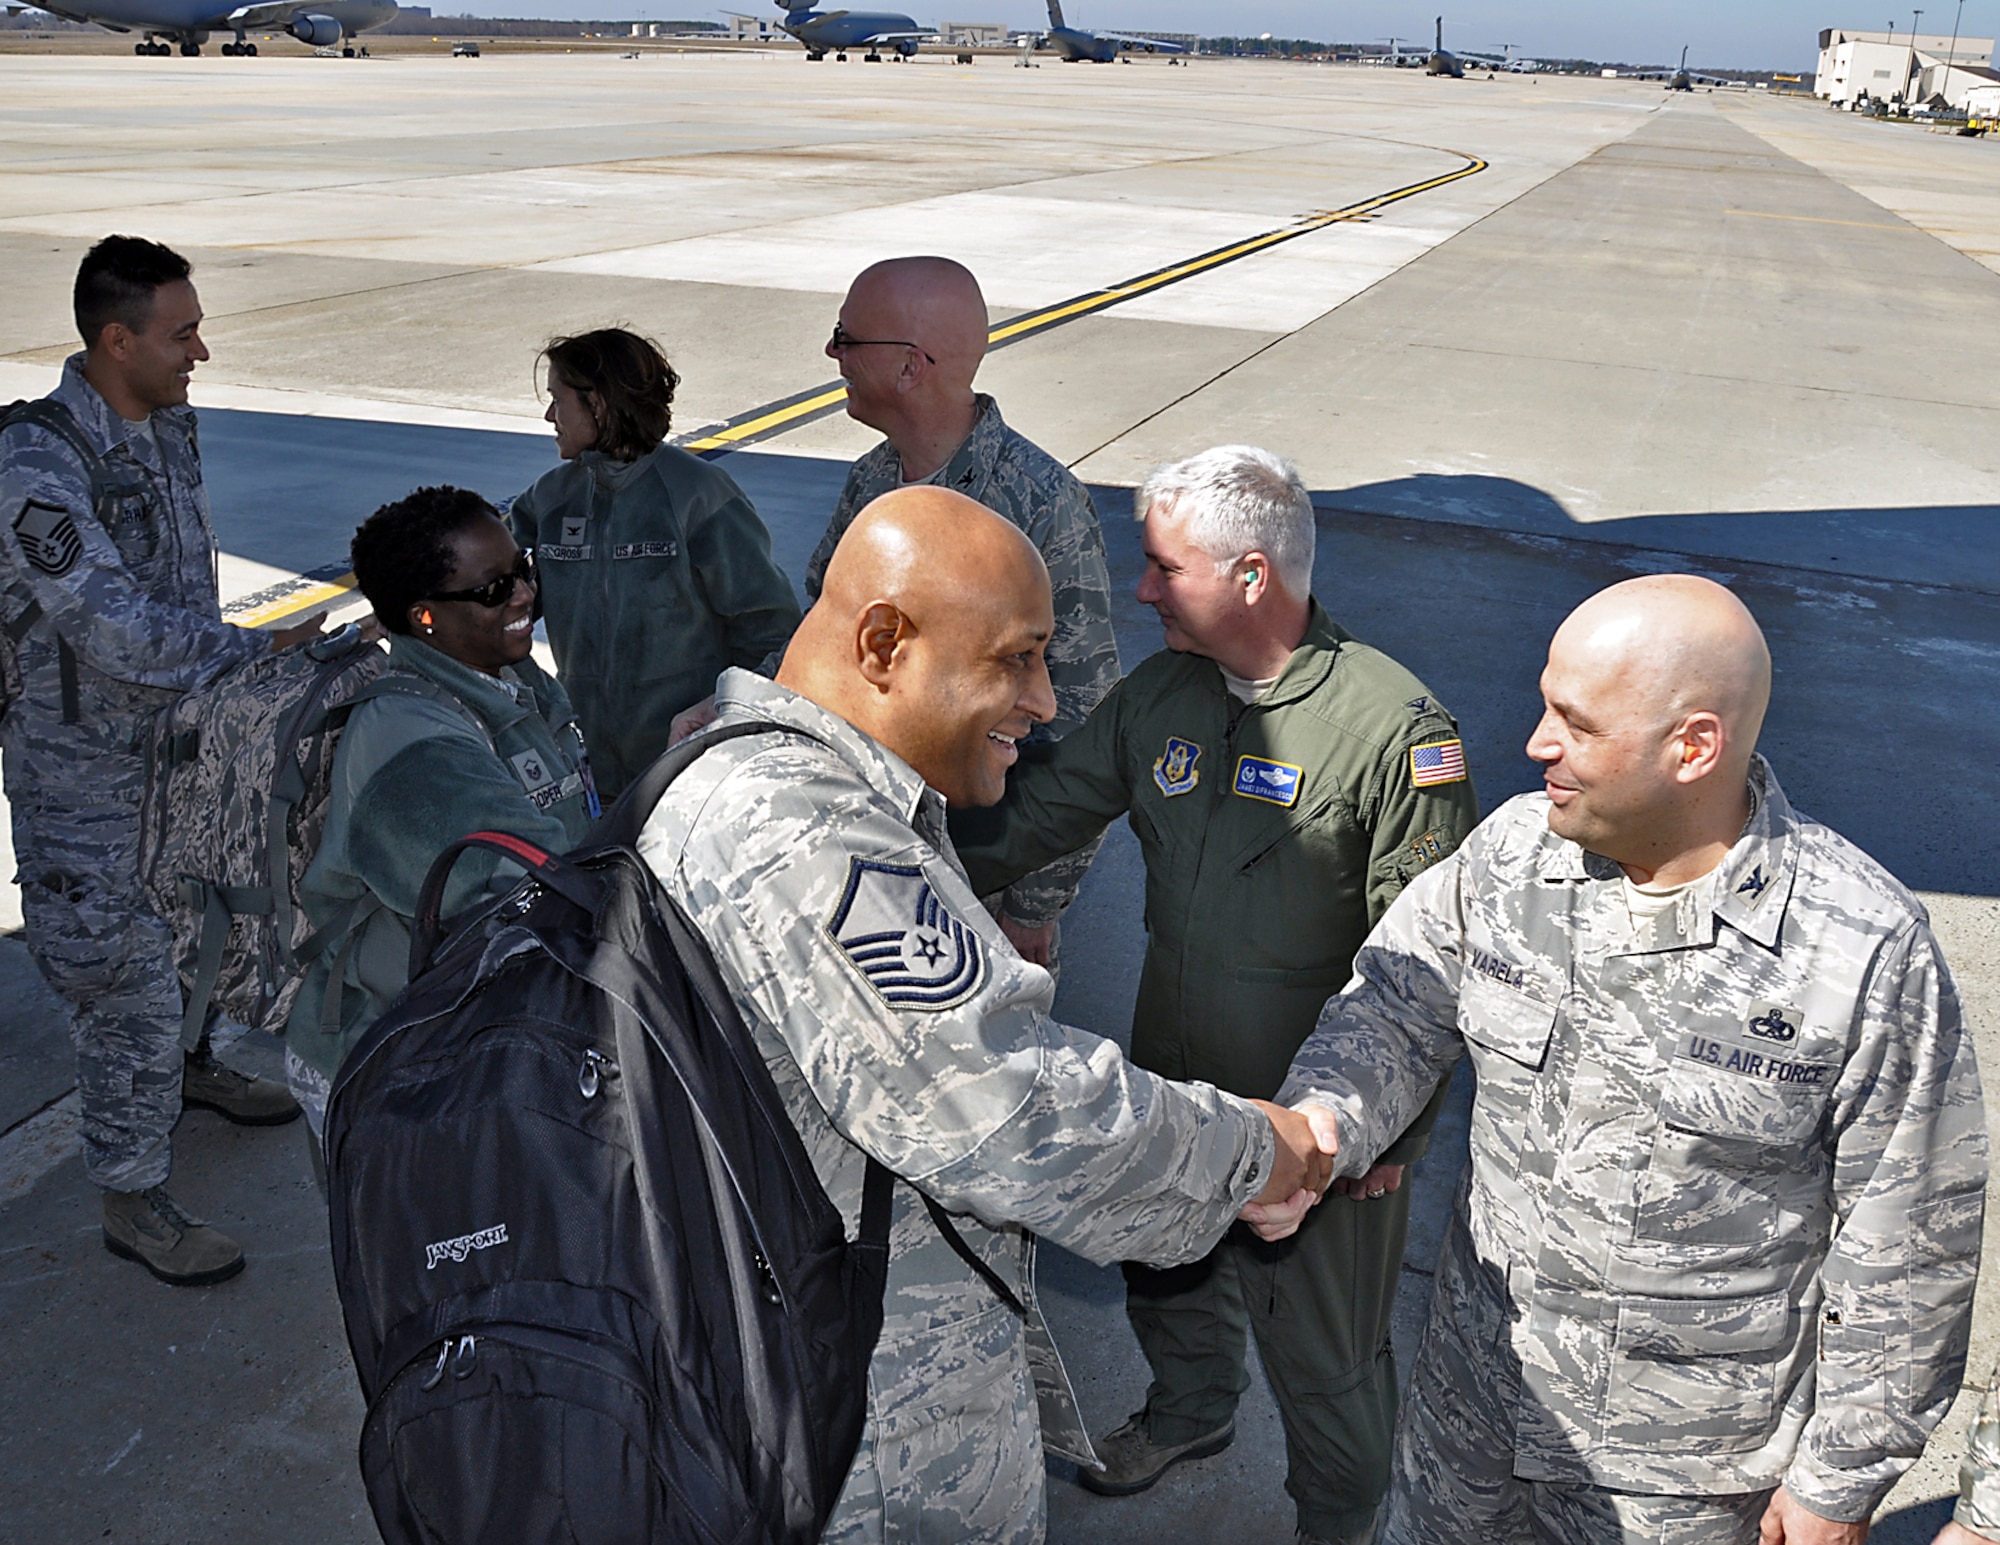 JOINT BASE MCGUIRE-DIX-LAKEHURST, N.J.-- Leaders from the 514th Air Mobility Wing and 87th Air Base Wing greet an inspection team from the Air Force Reserve Command on the flightline here March 17, 2011. The inspectors are here to perform a unit compliance inspection of the 514th AMW. (U.S. Air Force photo/Tech. Sgt. Shawn J. Jones) 